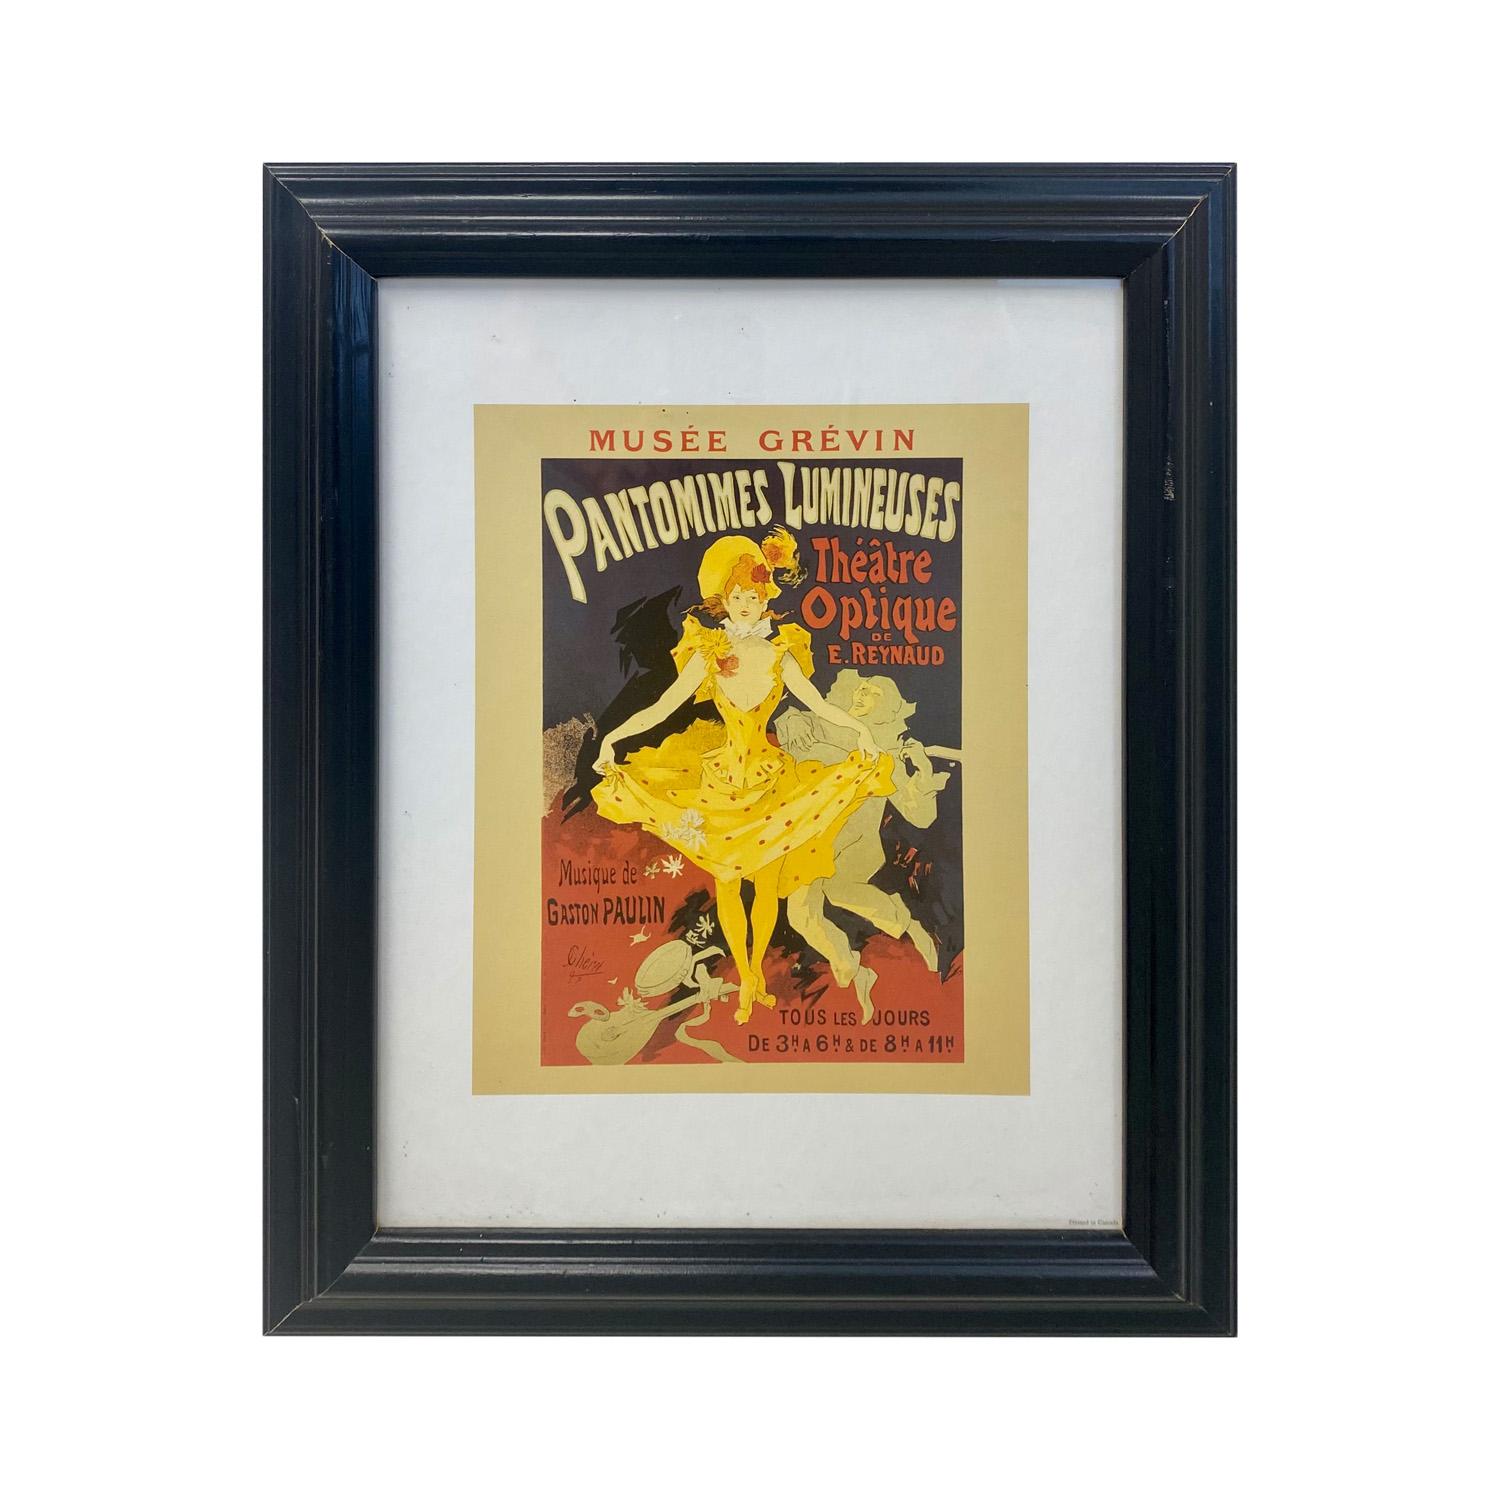 Jules Chéret Figurative Print - Muse Grevin "Pantomimes Lumineuses" Original Poster by Jules Cheret